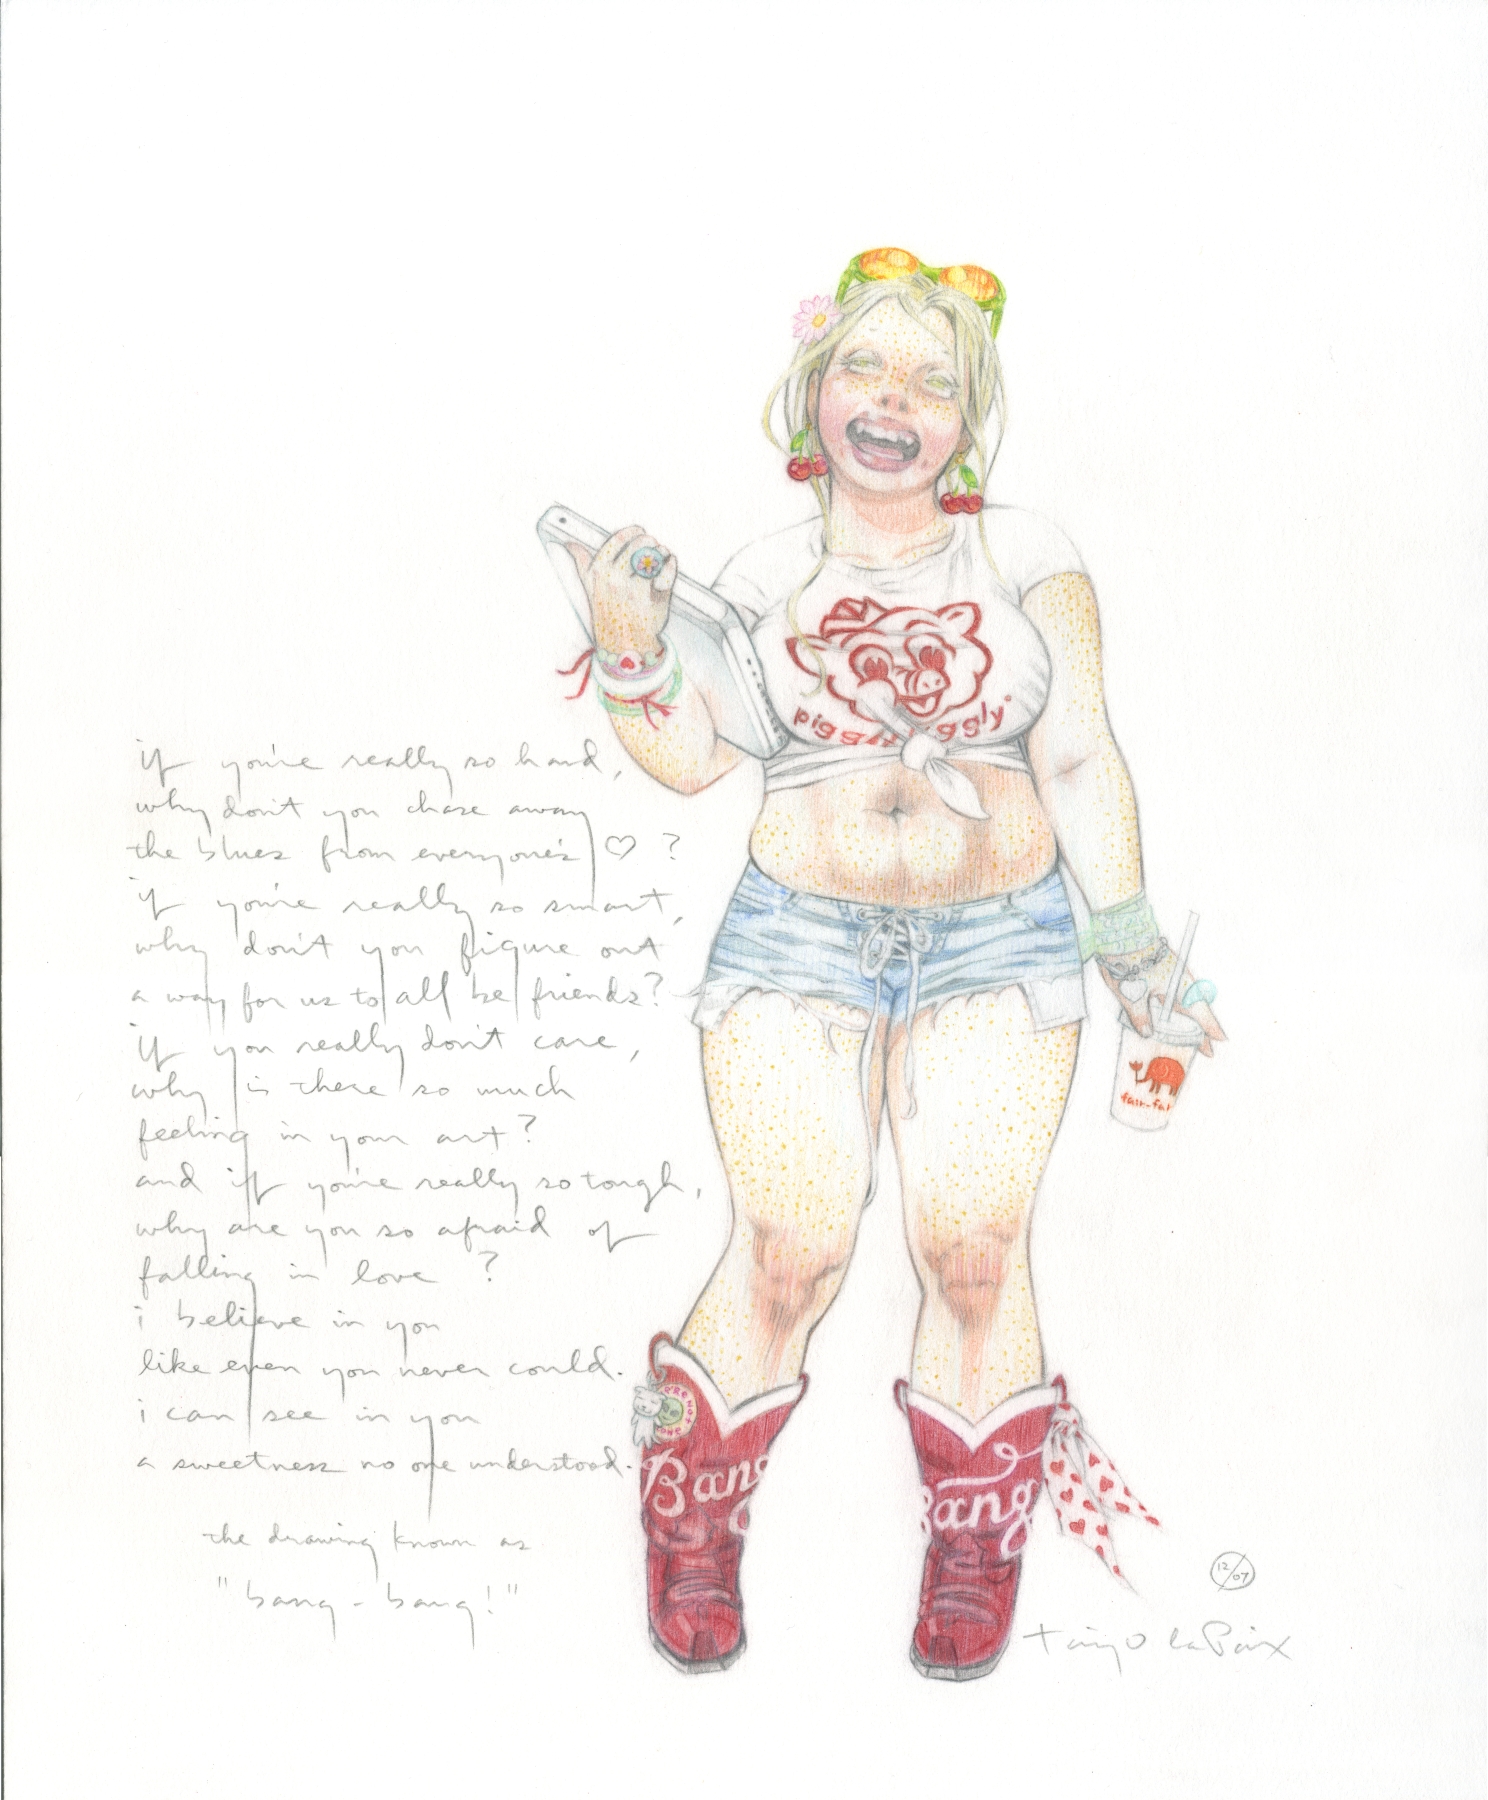 Bang-bang!, 2007, courtesy of Betty Clark, pencil on paper, 13 x 10 inches